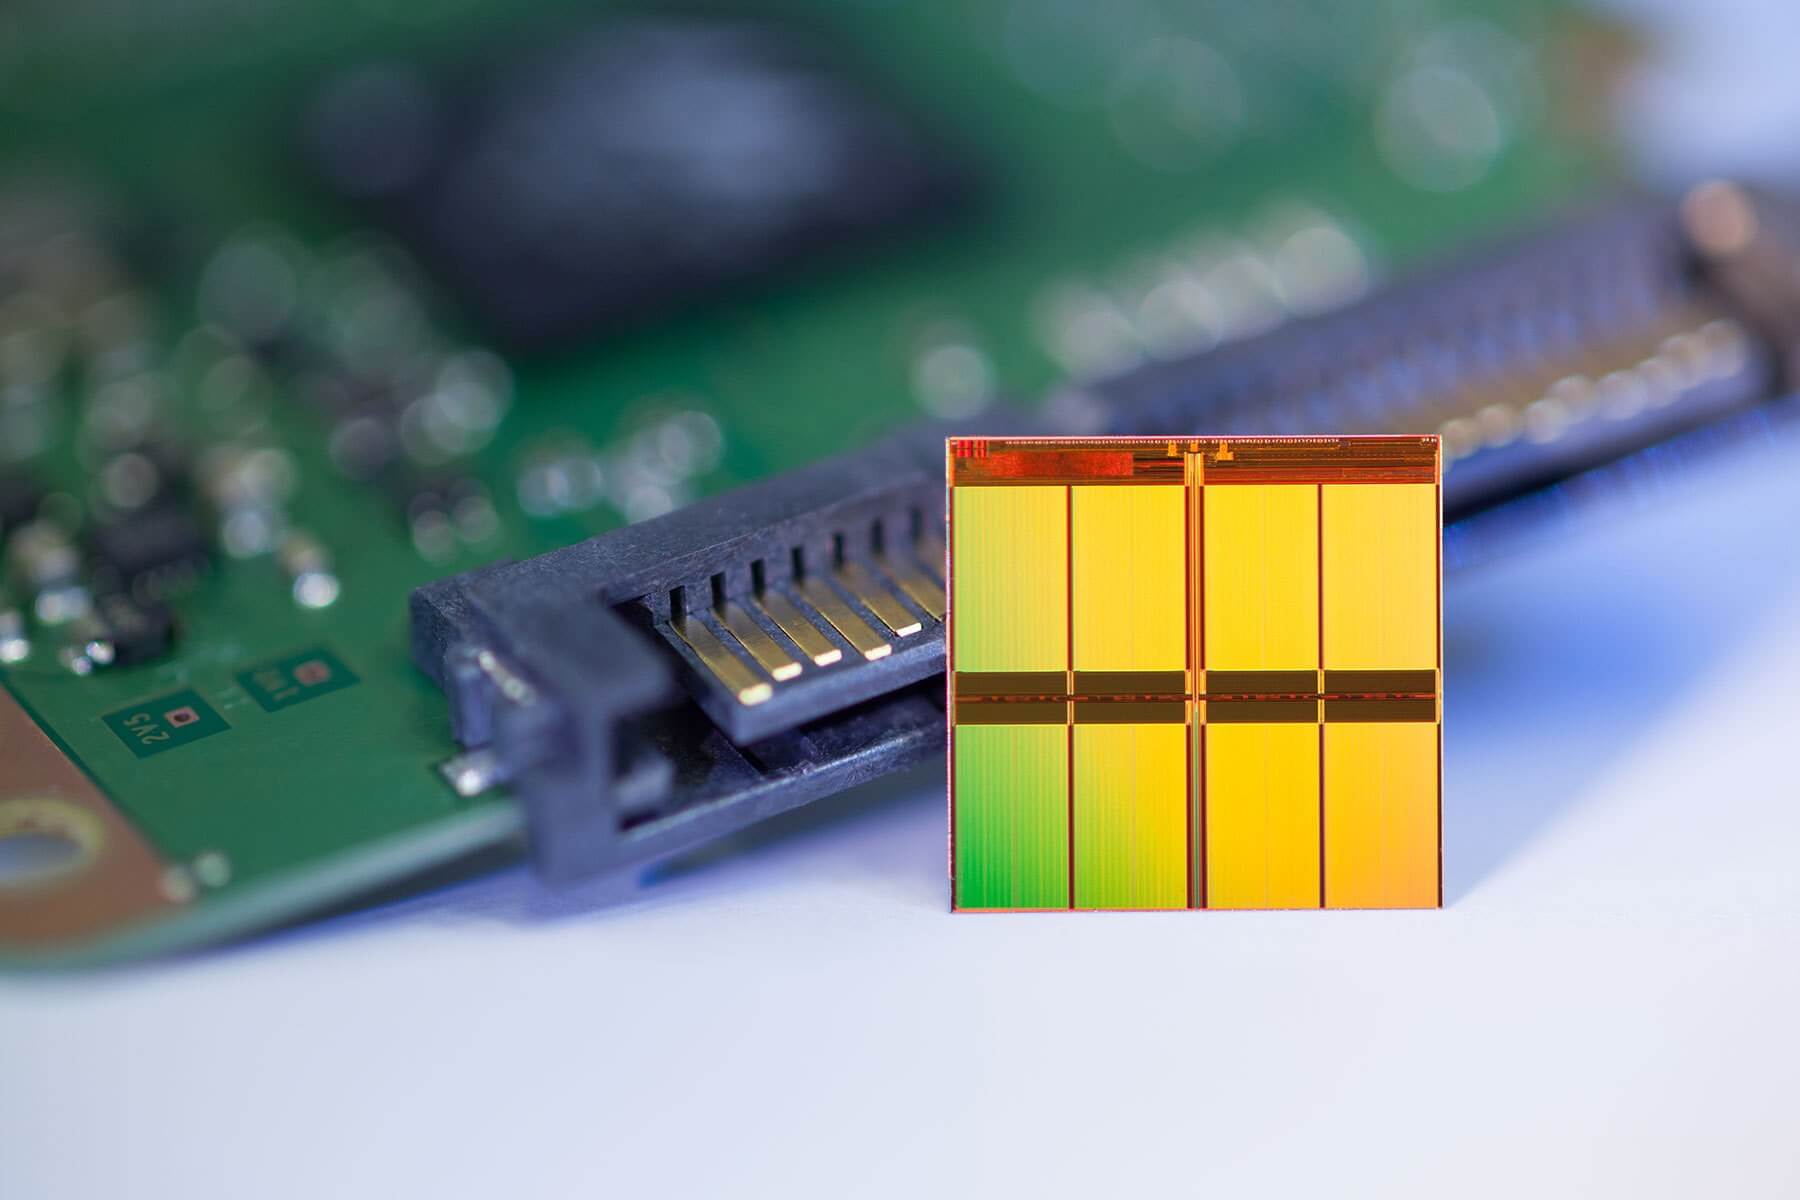 Hardware-based disk encryption can be bypassed in certain SSDs